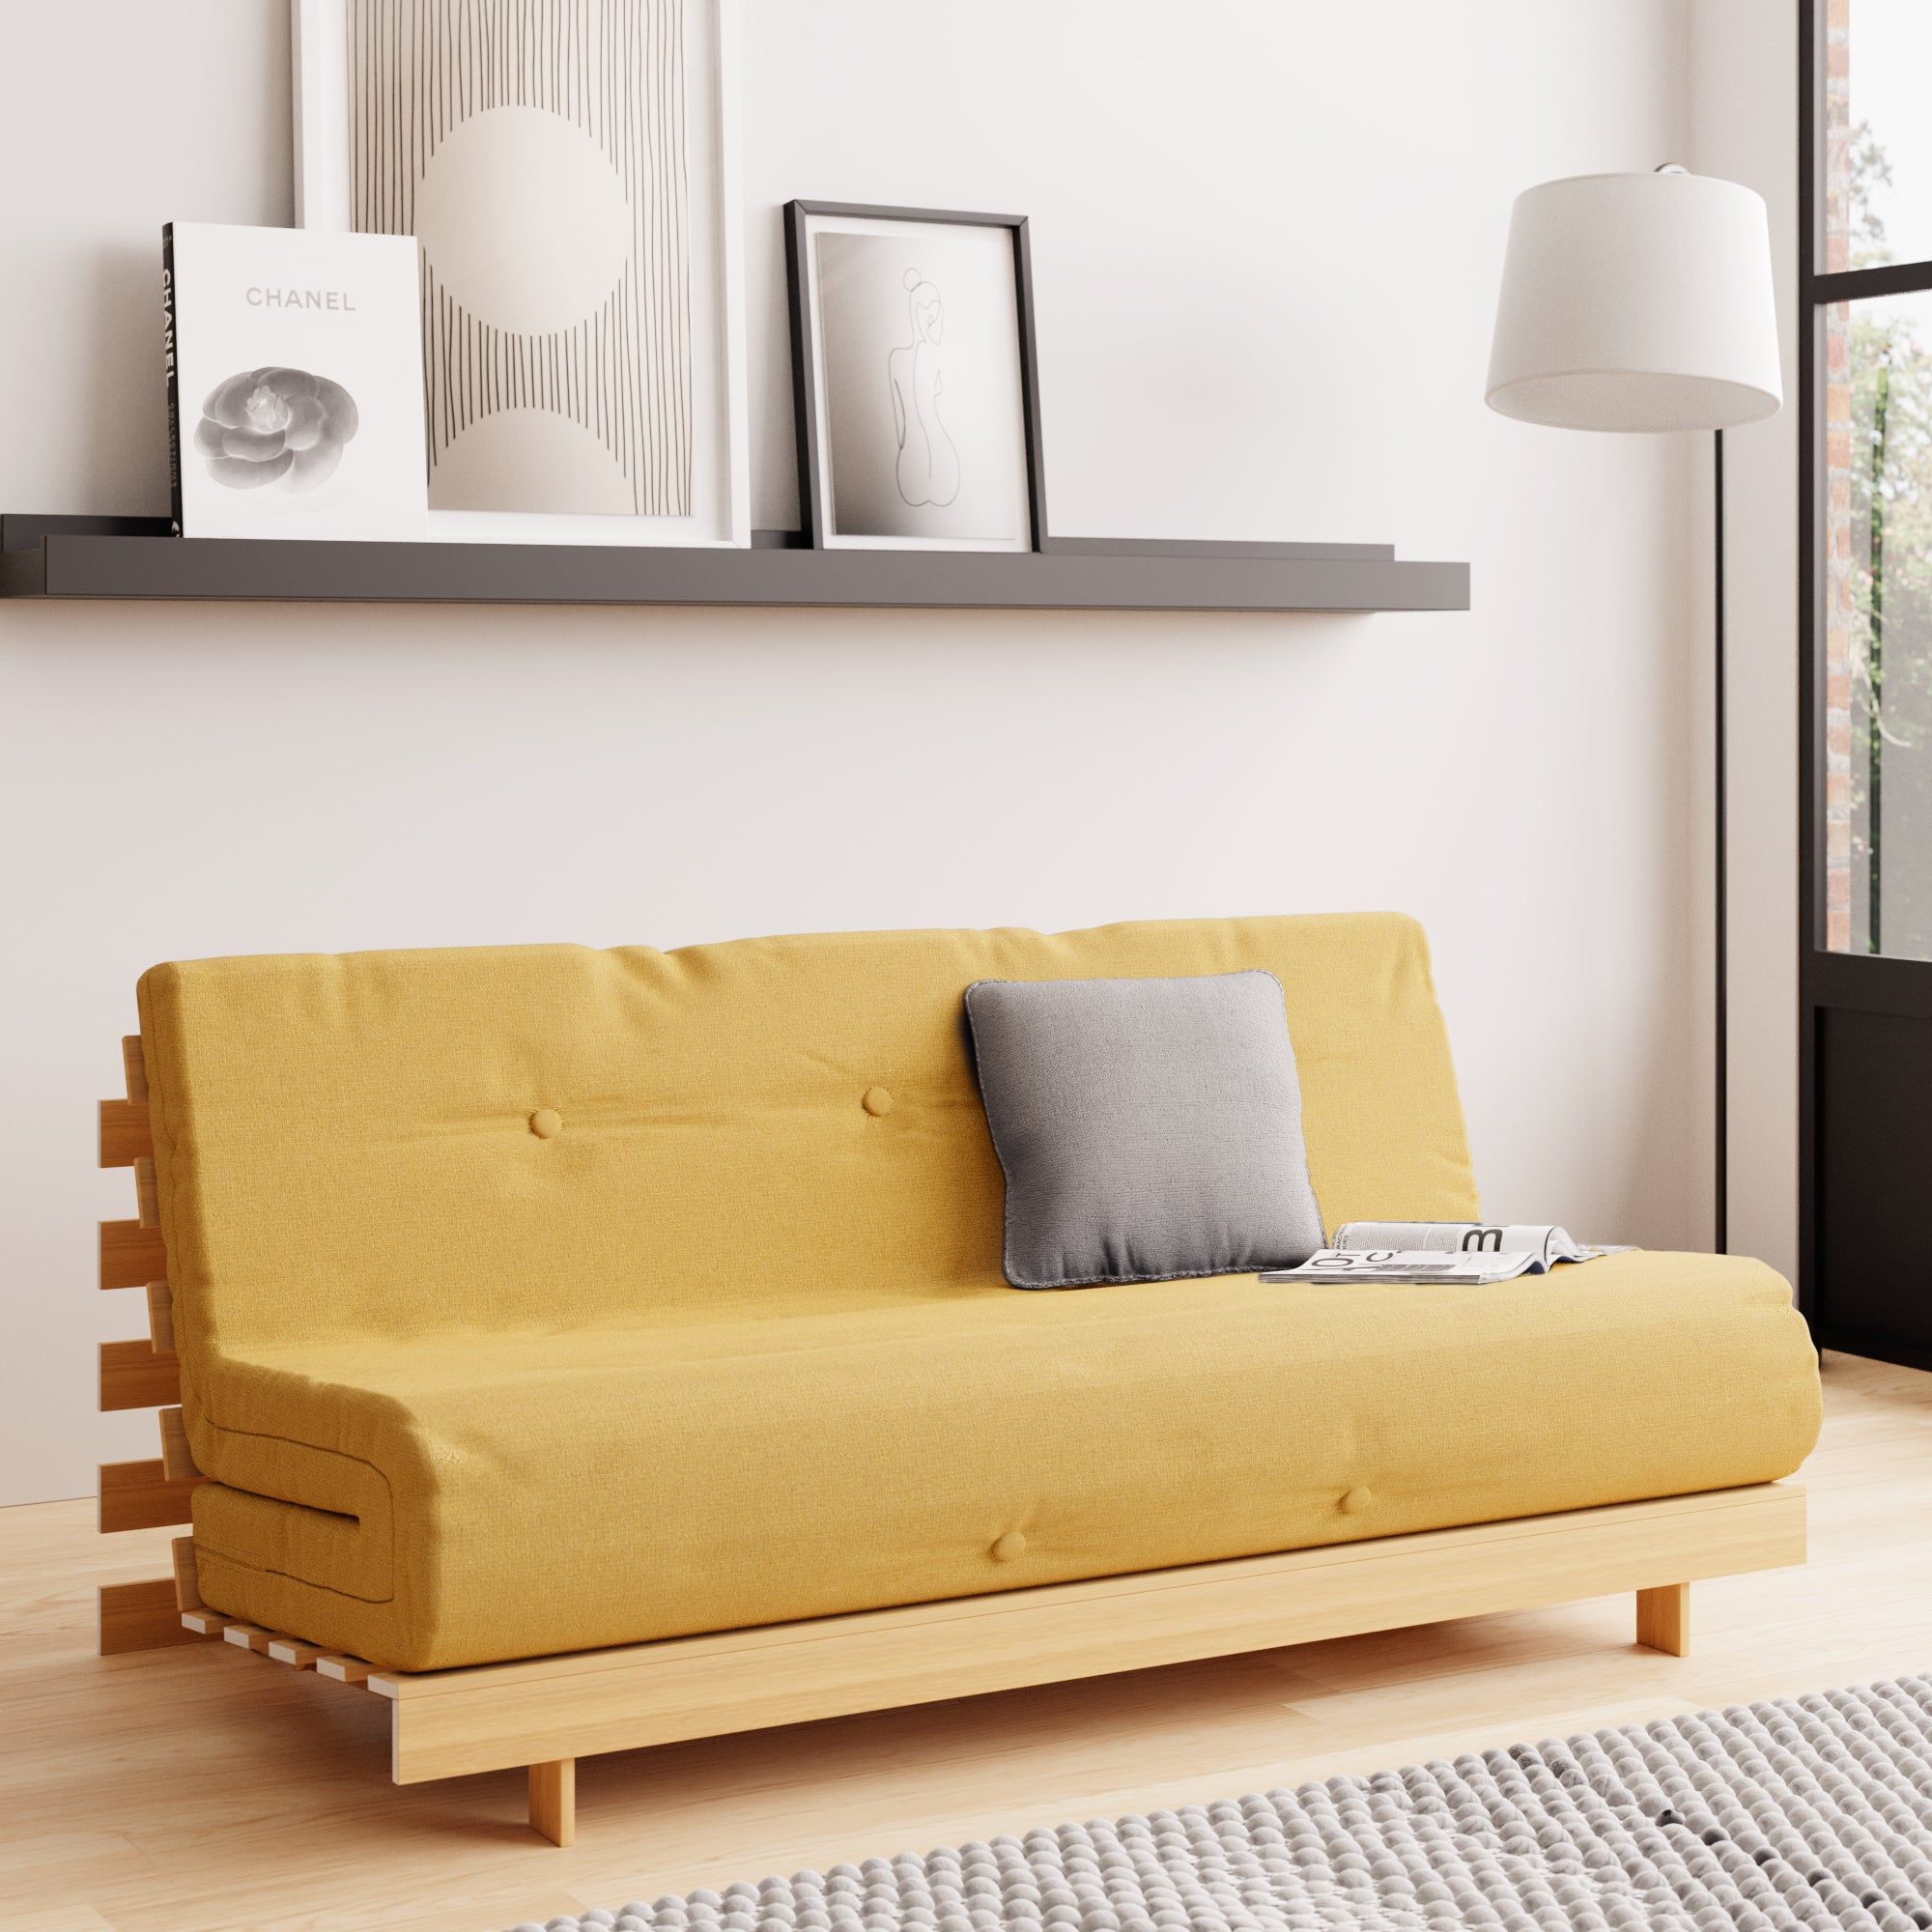 Use futon sofa bed for a dual
purpose  function in your apartment